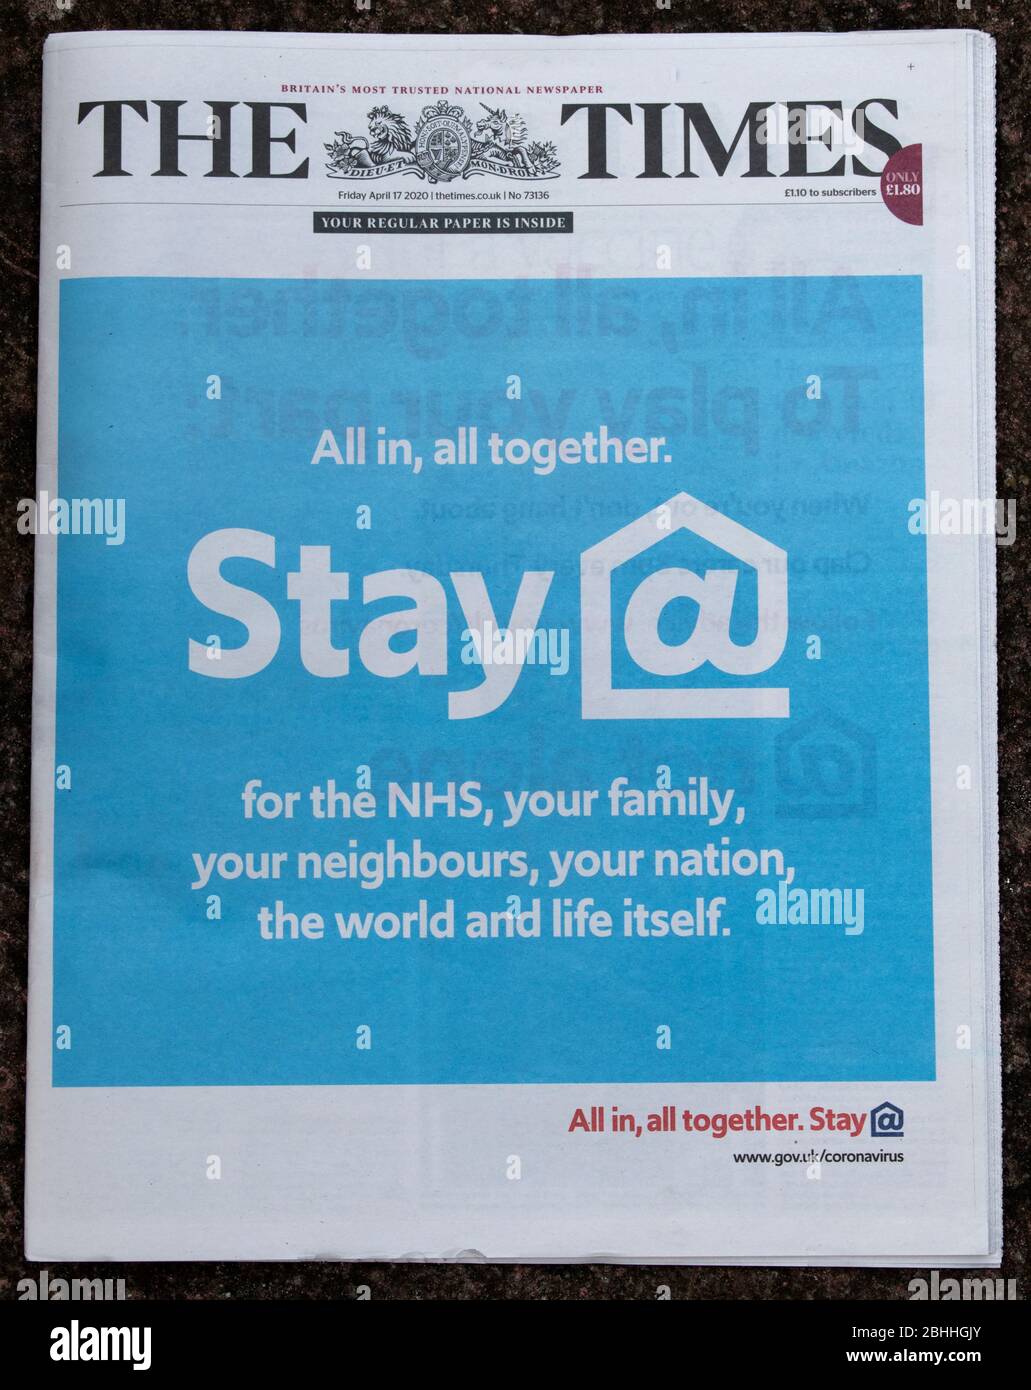 The Times Newspaper London Friday April 17 2020.  NHS advertisement wrap around front cover of the newspaper Your Regular Newspaper inside.  Stay at Home, All in All Together. 2020s UK HOMER SYKES Stock Photo